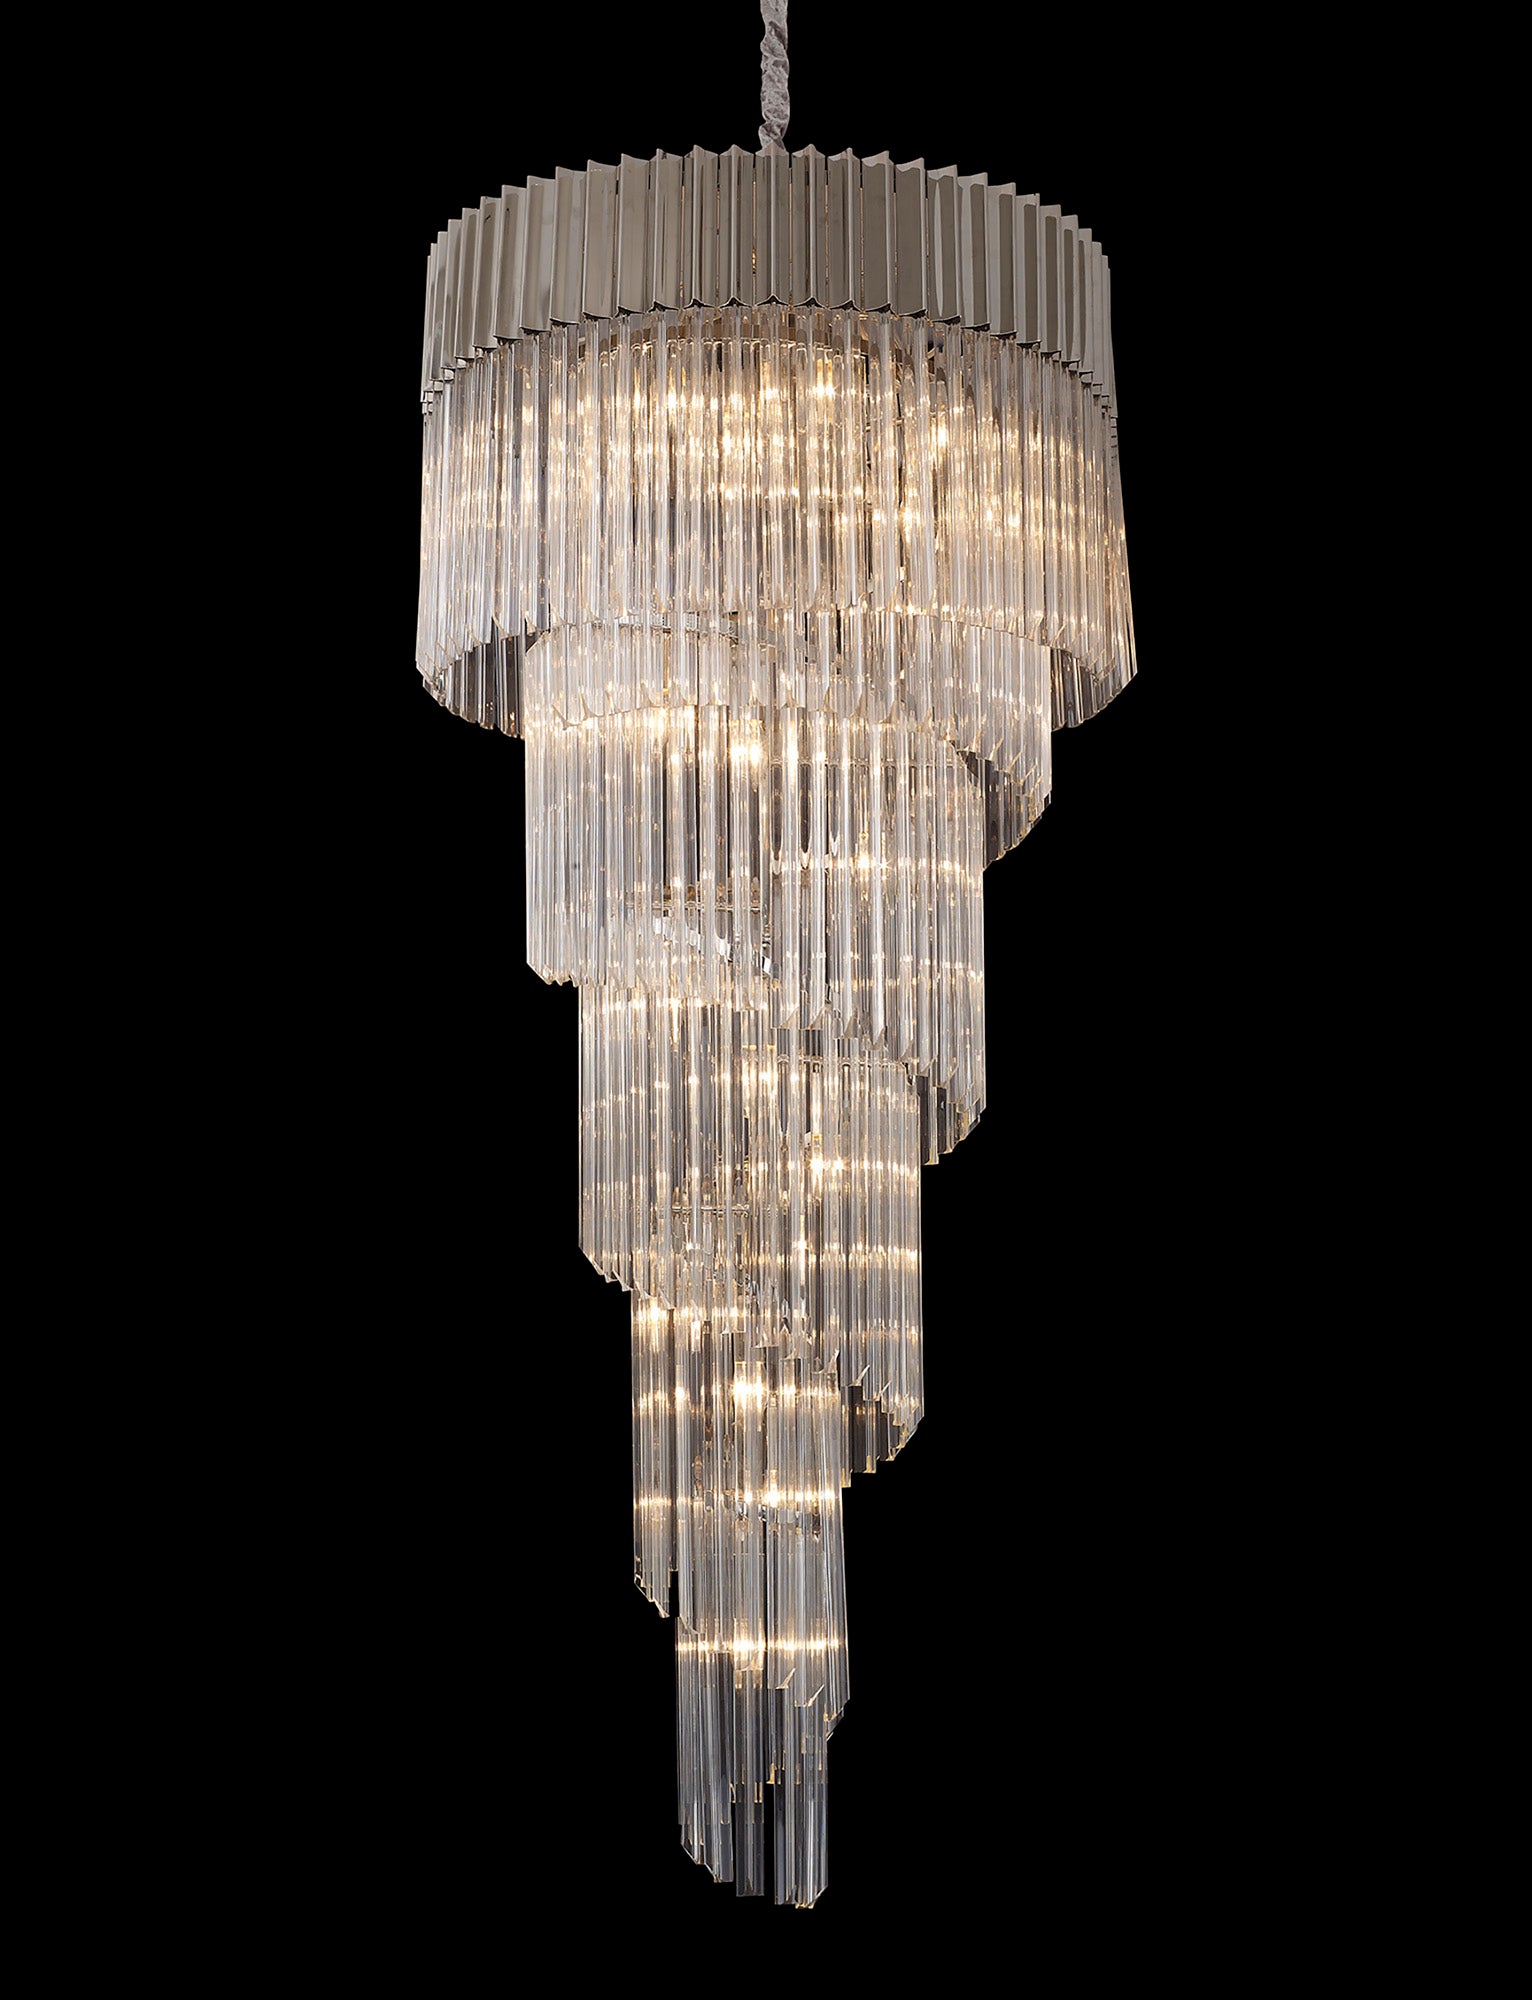 Knightsbridge Pendant Round 5 Tier 23 Light E14, Polished Nickel/Clear Glass - LO182433.Item Weight: 56.2kg